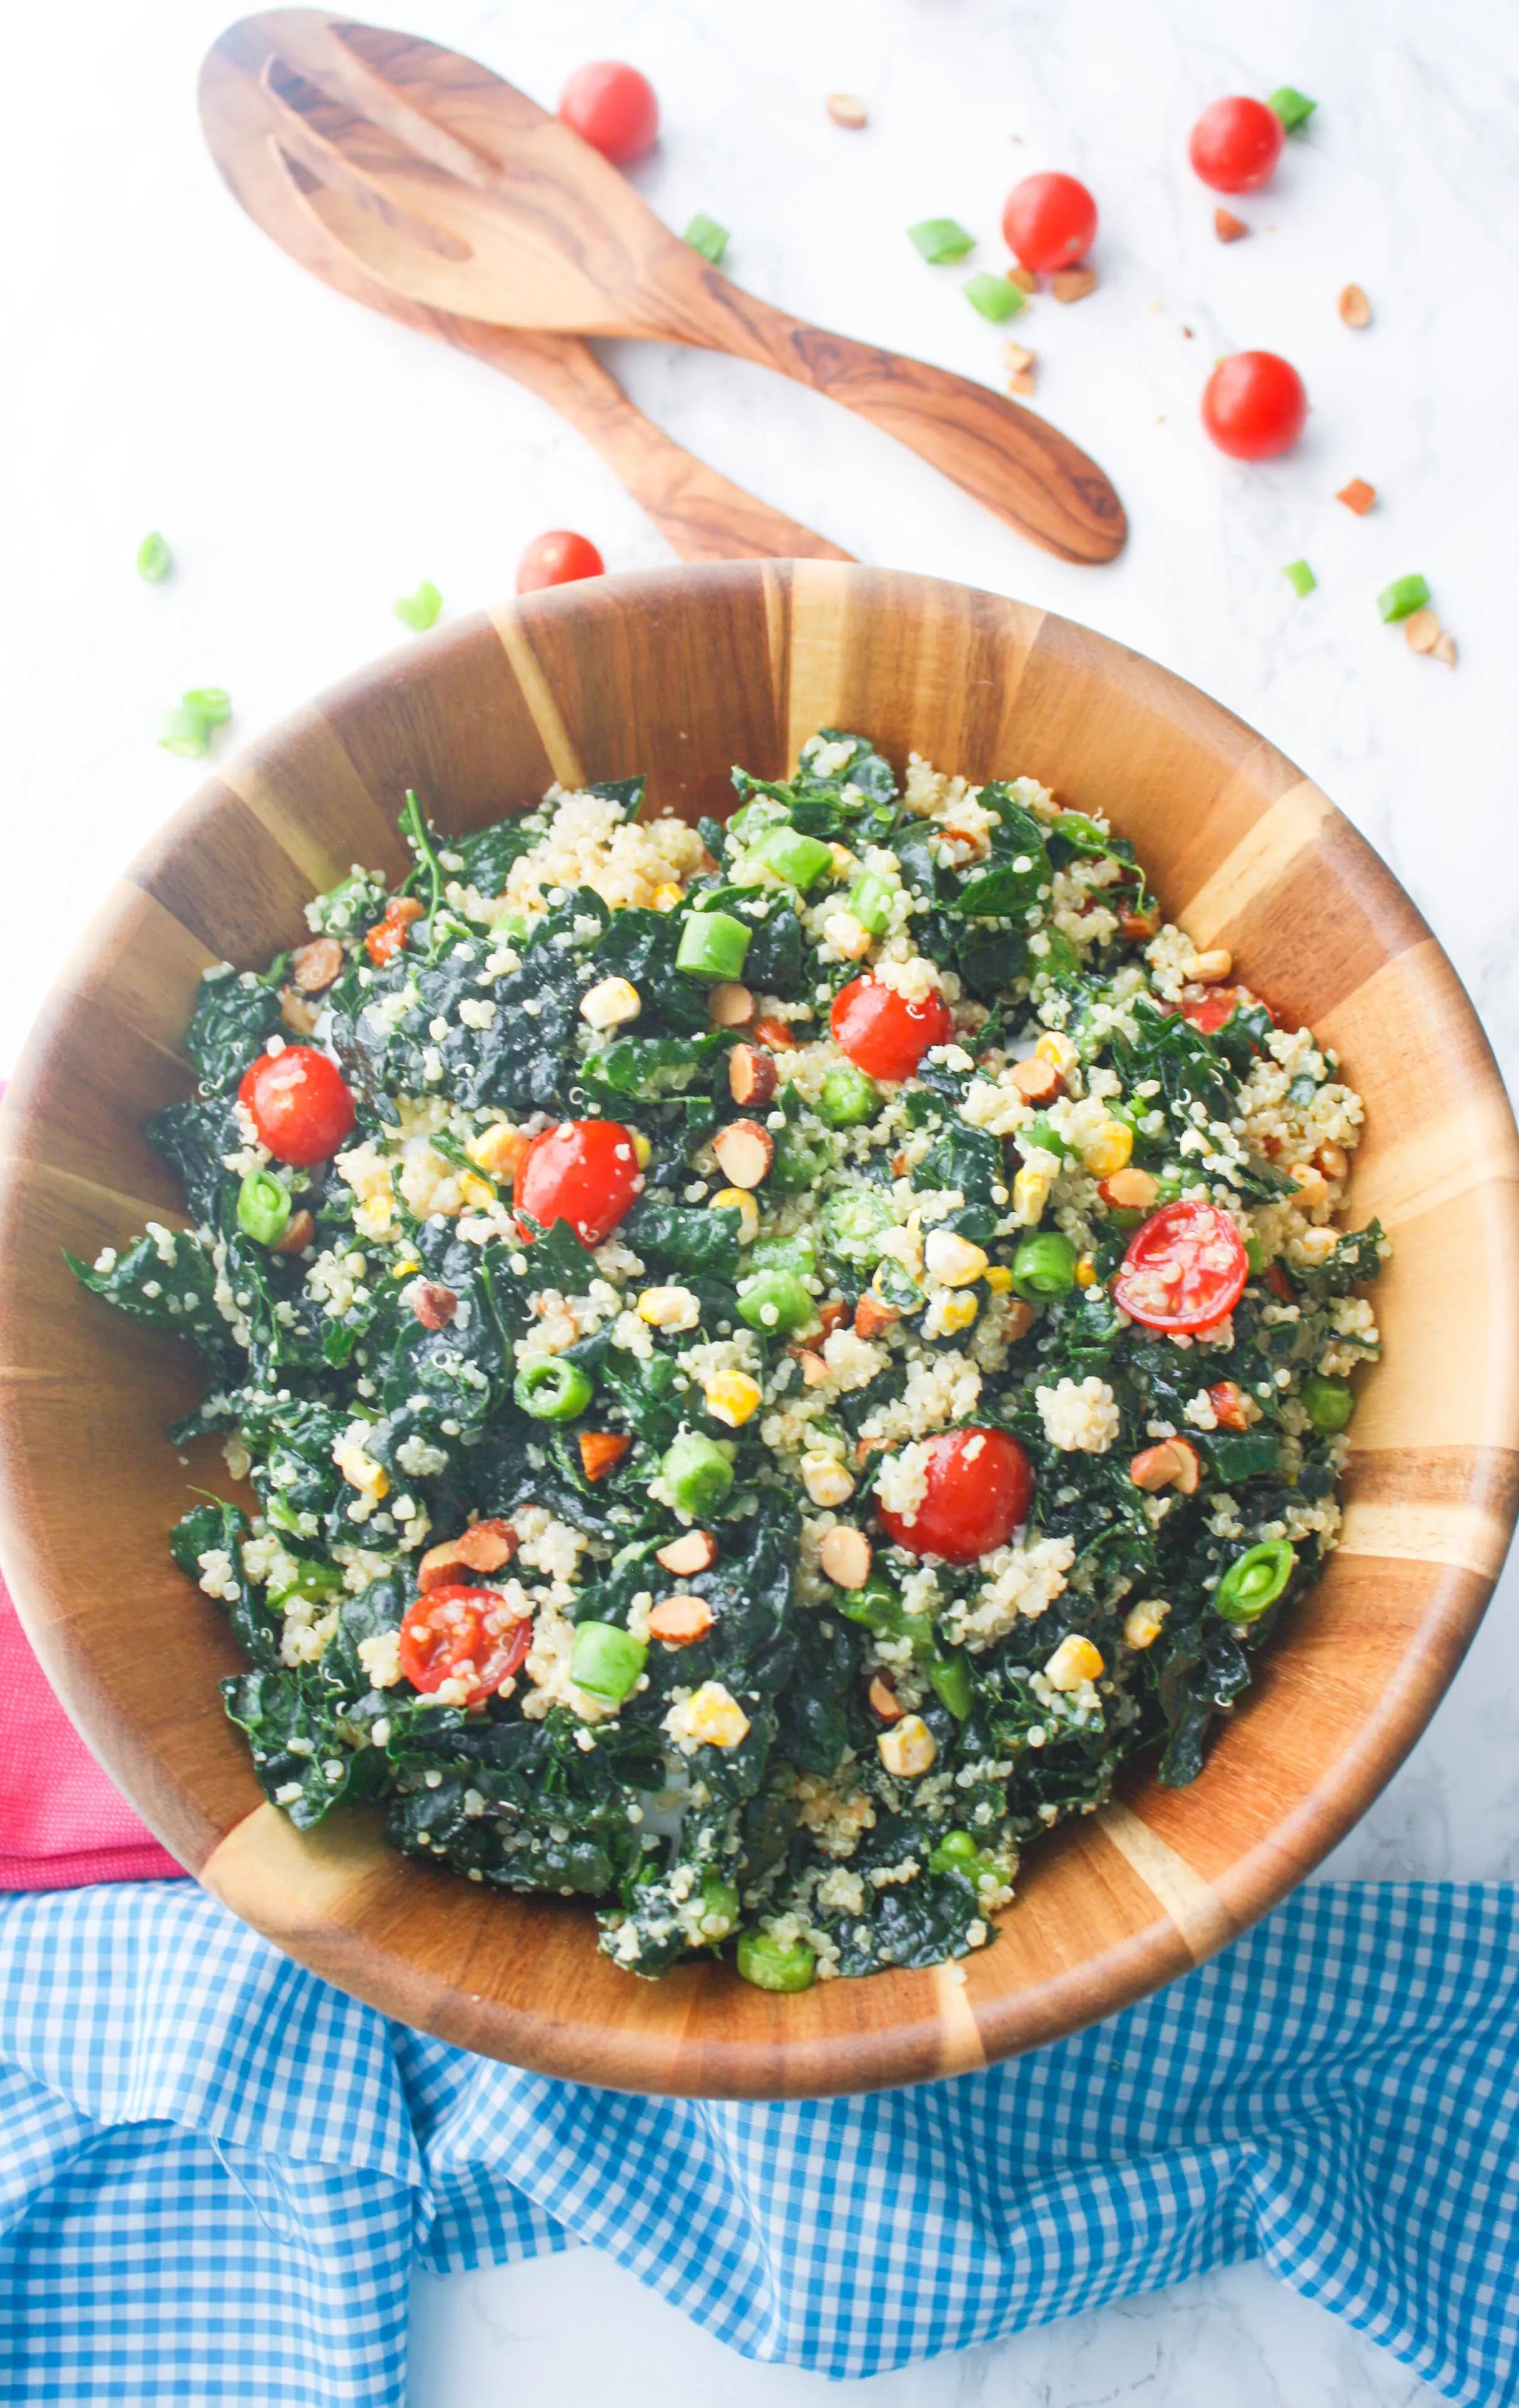 Kale and Quinoa Salad with Honey-Dijon Dressing makes a great addition to any light meal. There are so many great ingredients in Kale and Quinoa Salad with Honey-Dijon Dressing!